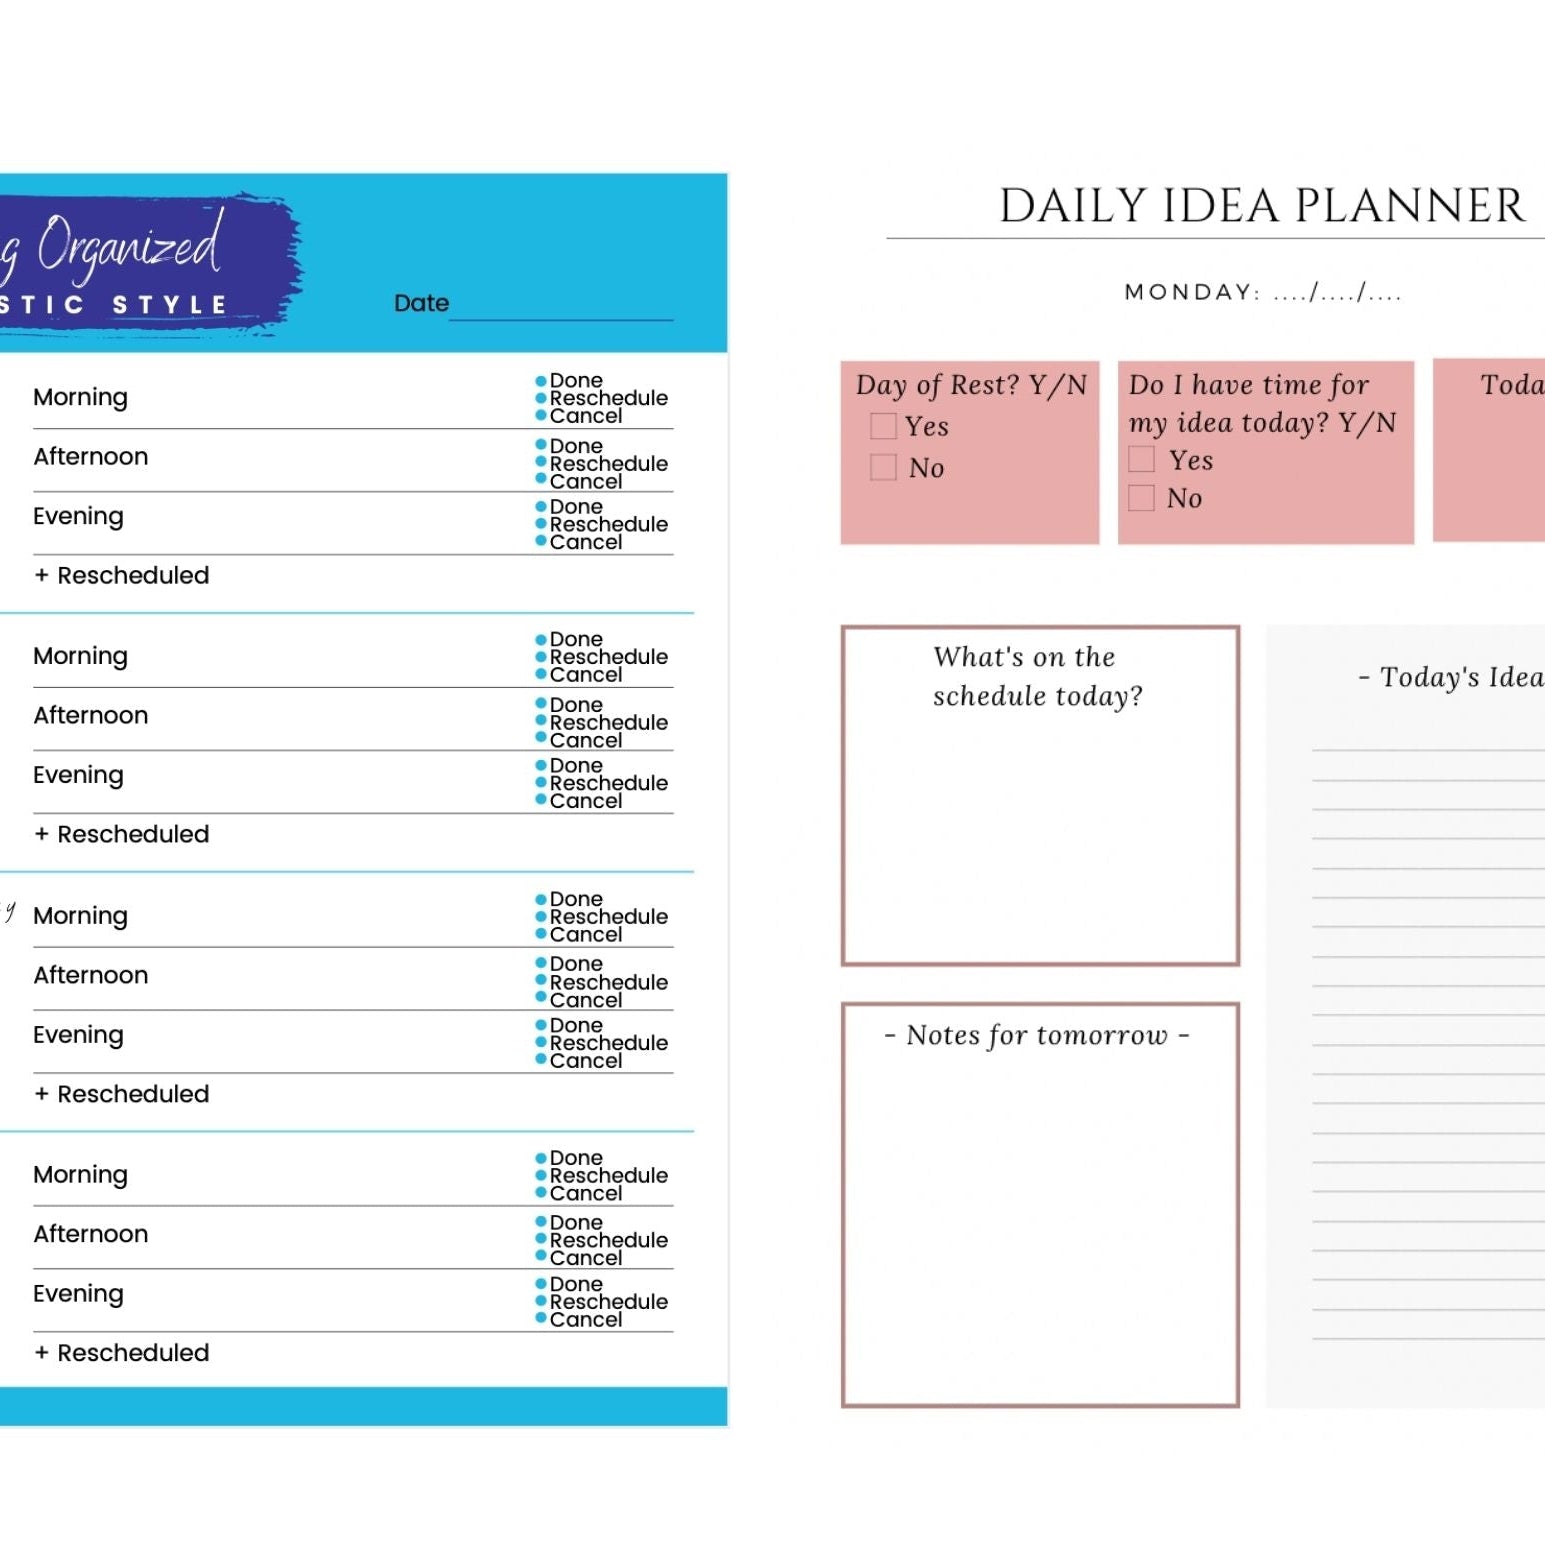 Daily Idea Planner & Weekly Schedule Planner (Bundle) The Autistic Innovator 